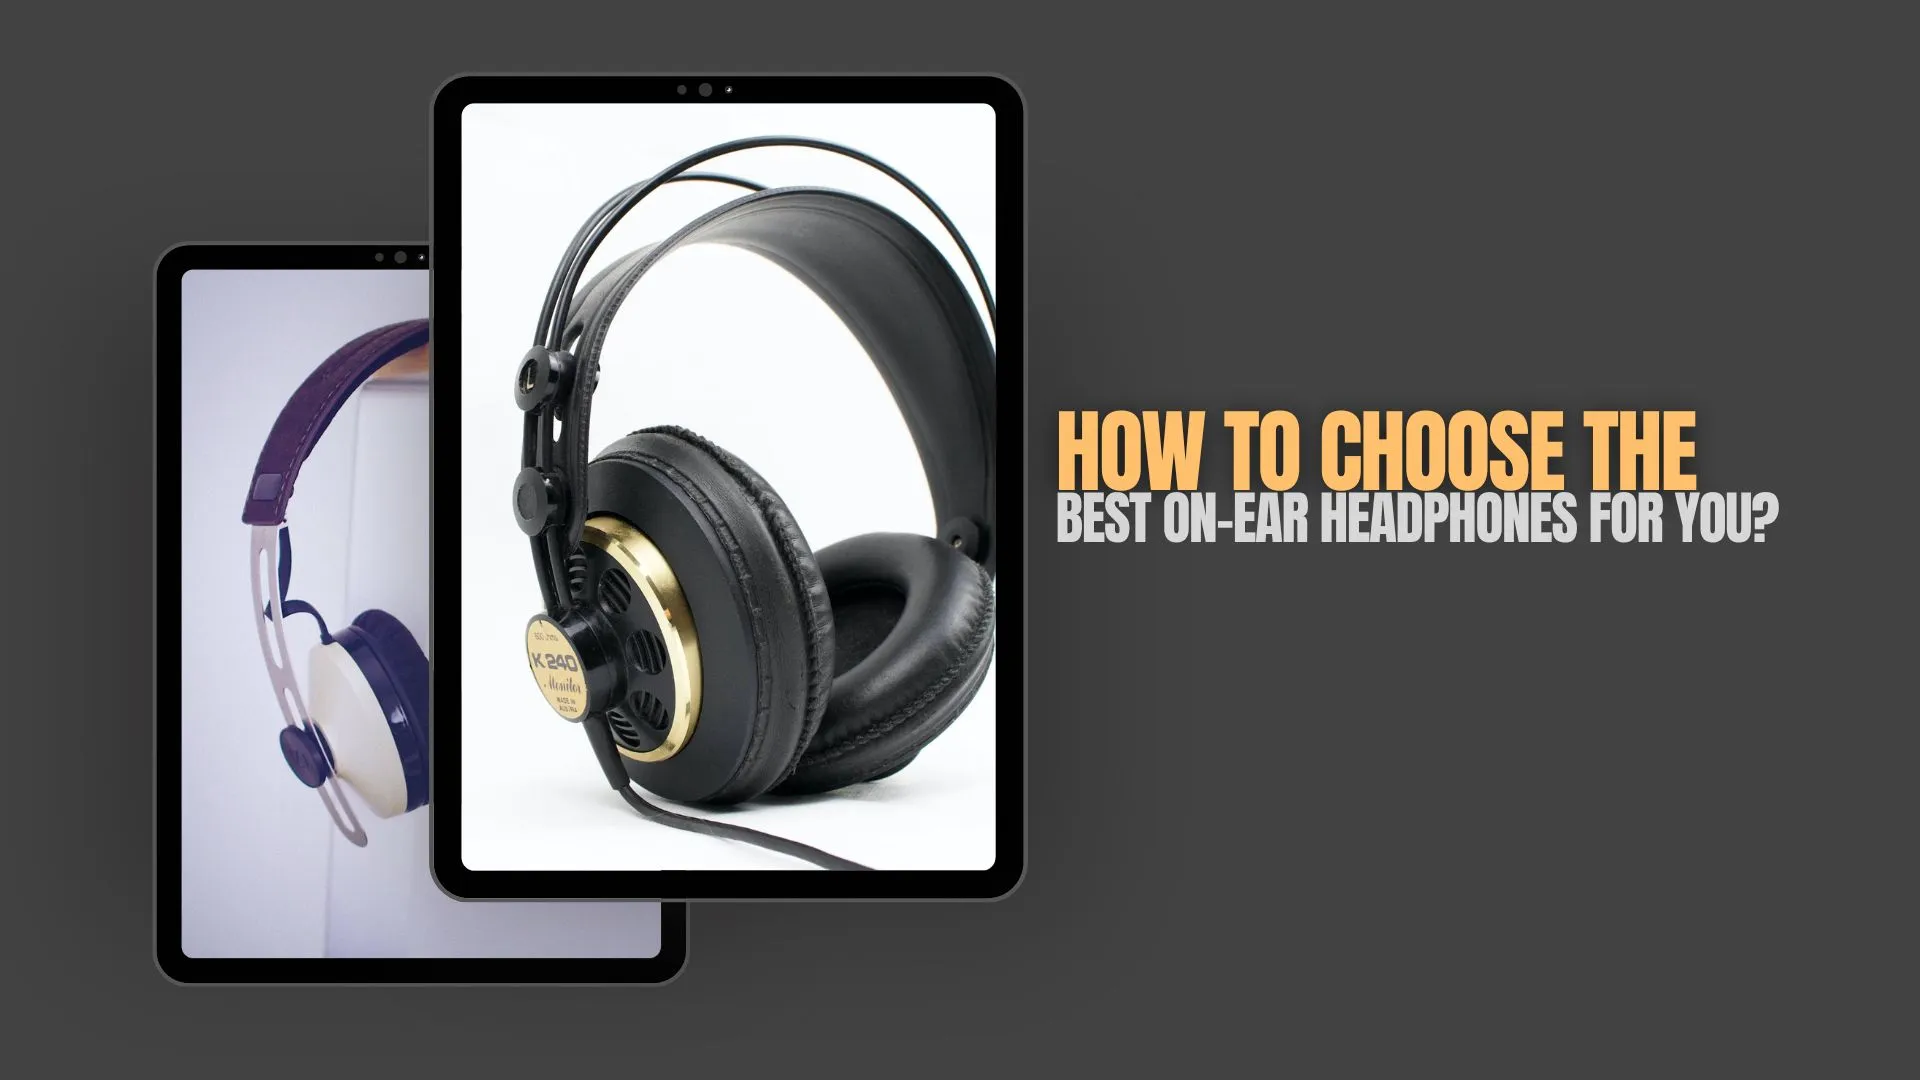 How to Choose the Best On-Ear Headphones for You?